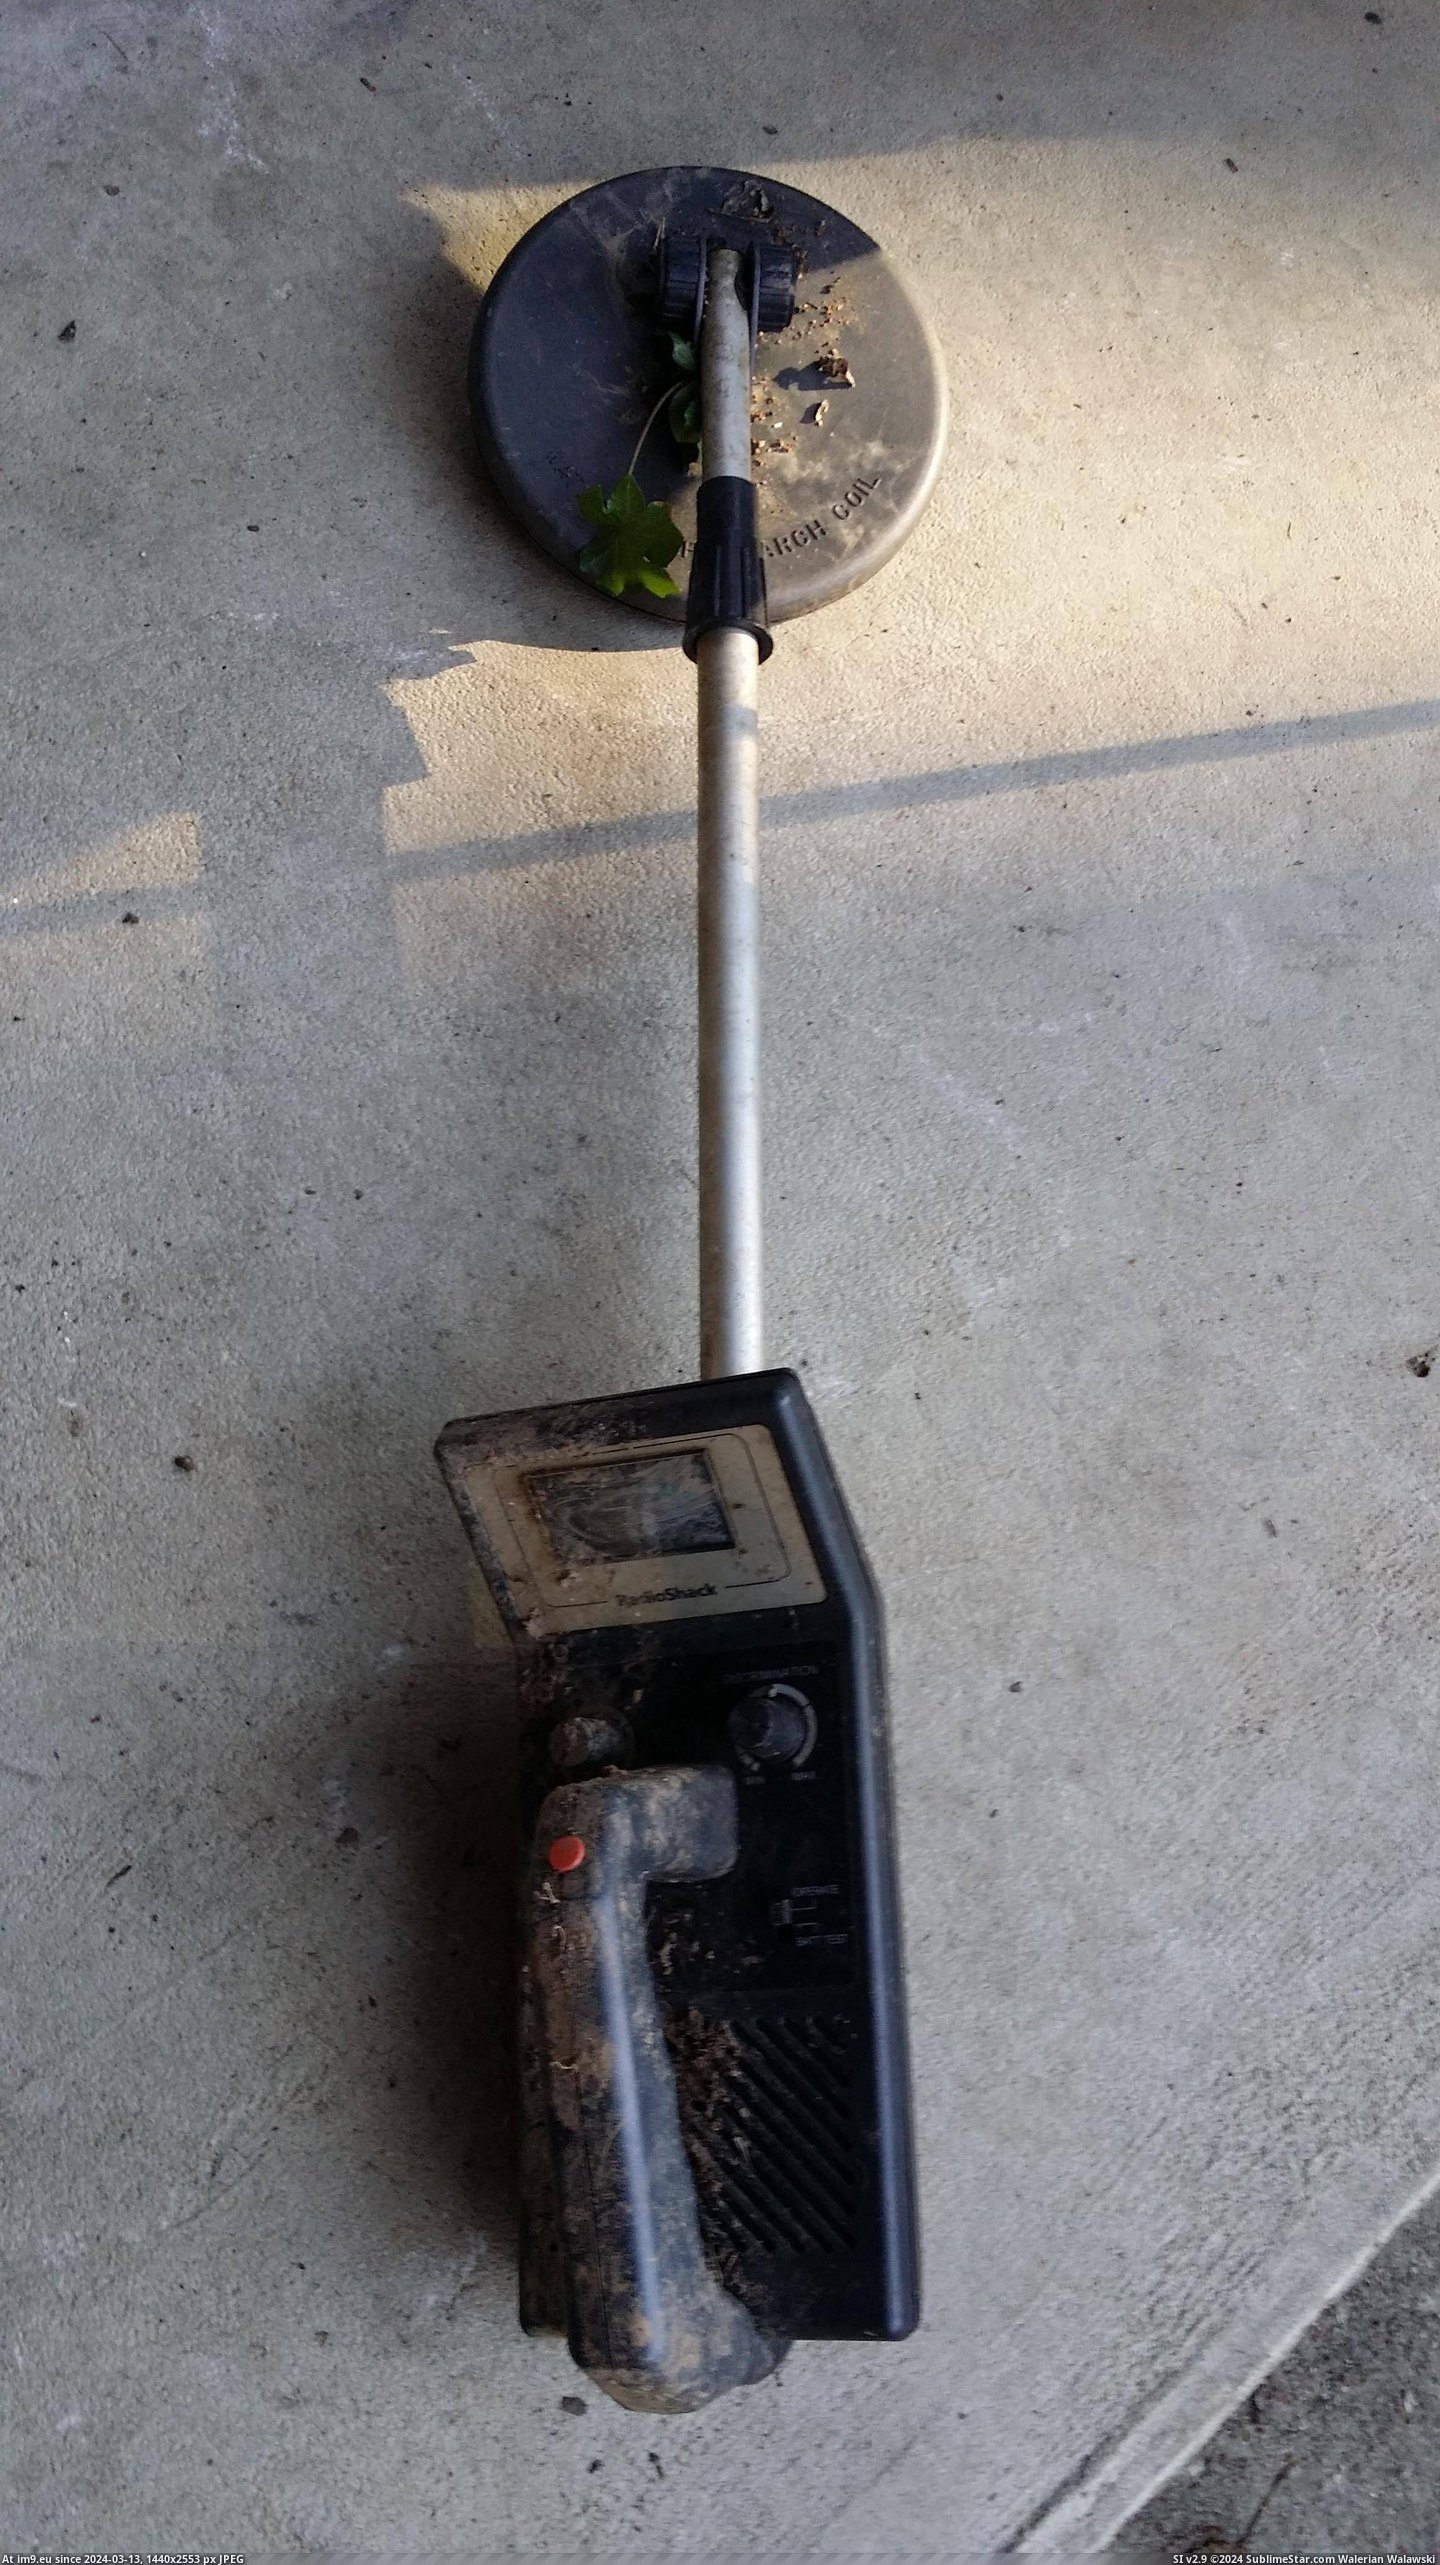 #Year #Old #Christmas #Received #Parent #Property #Son #Asked #Metal [Pics] My 11-year old son asked for & received a metal detector for Christmas. He took it out on my parent's property, and t Pic. (Bild von album My r/PICS favs))